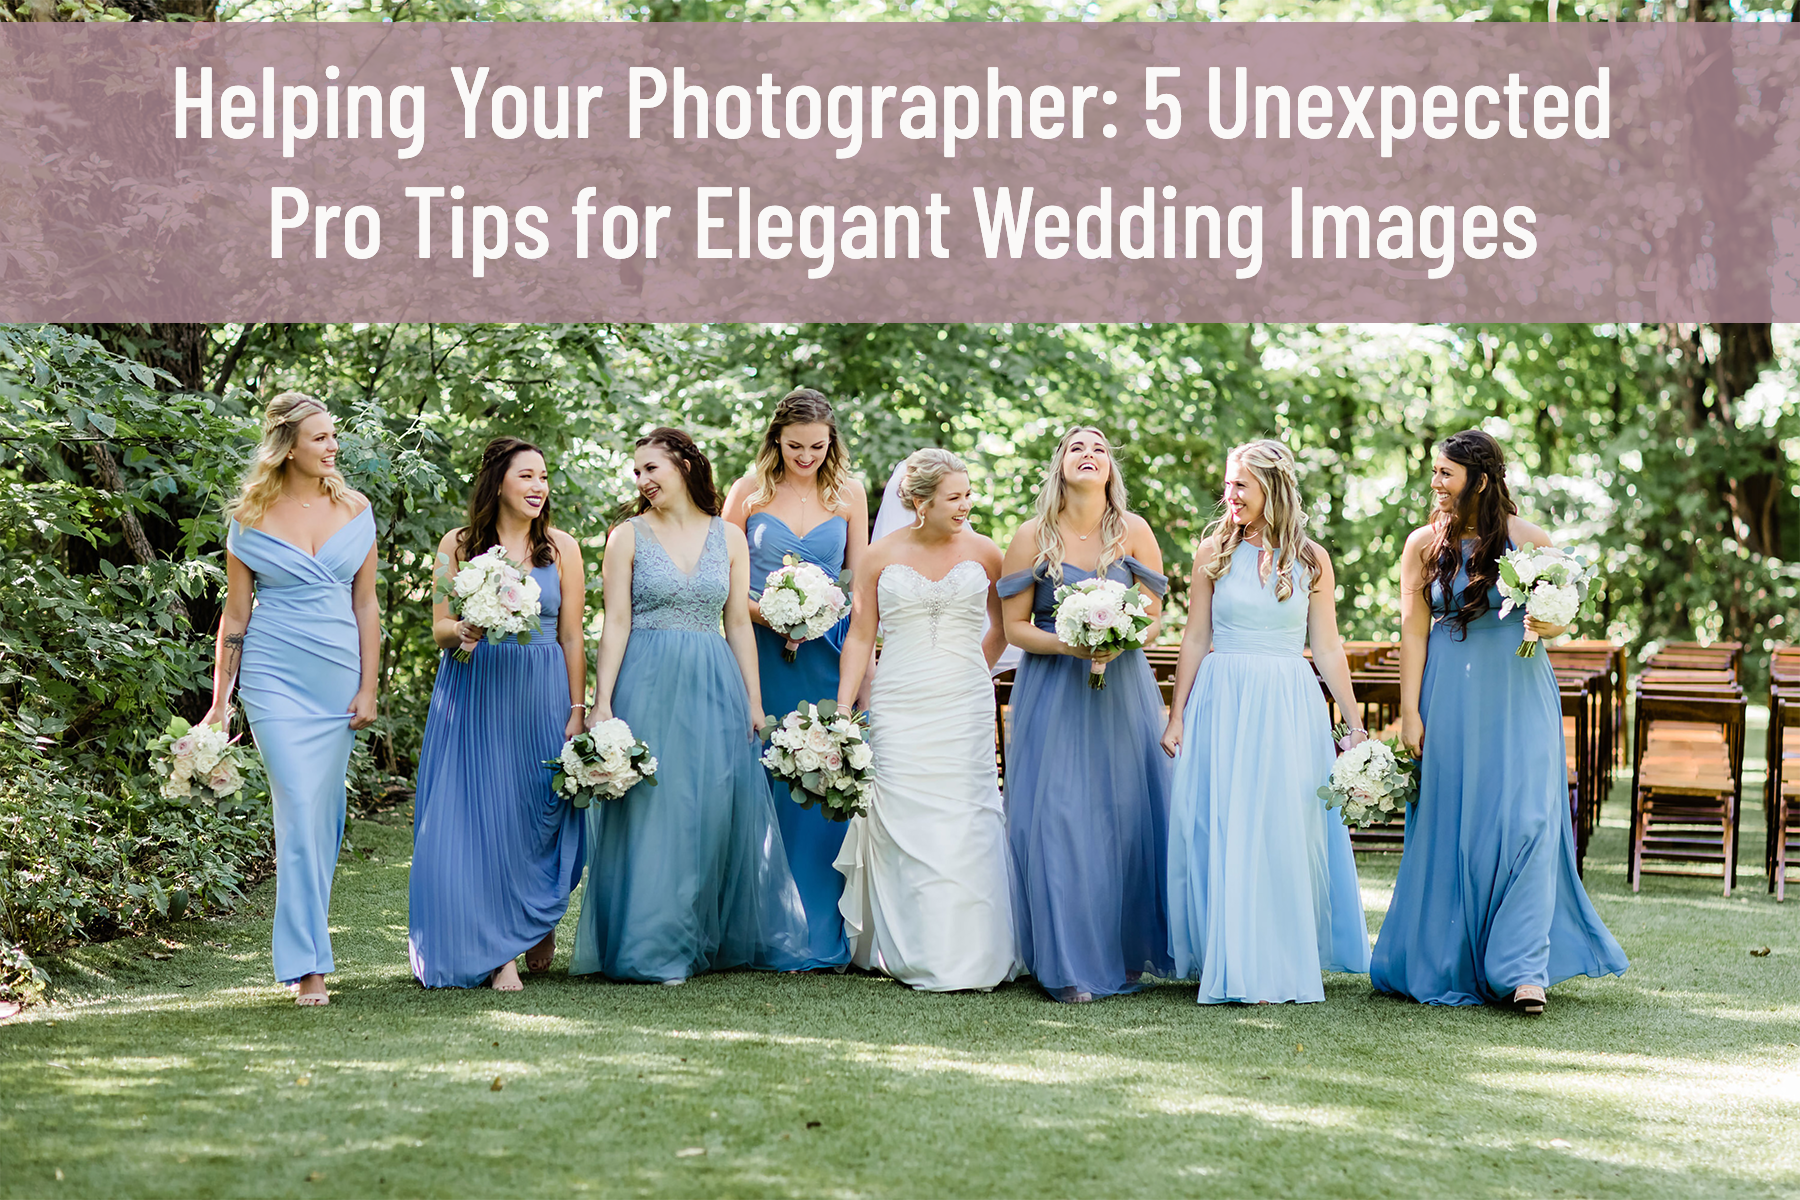 Unexpected pro tips for helping your photographer get elegant wedding images